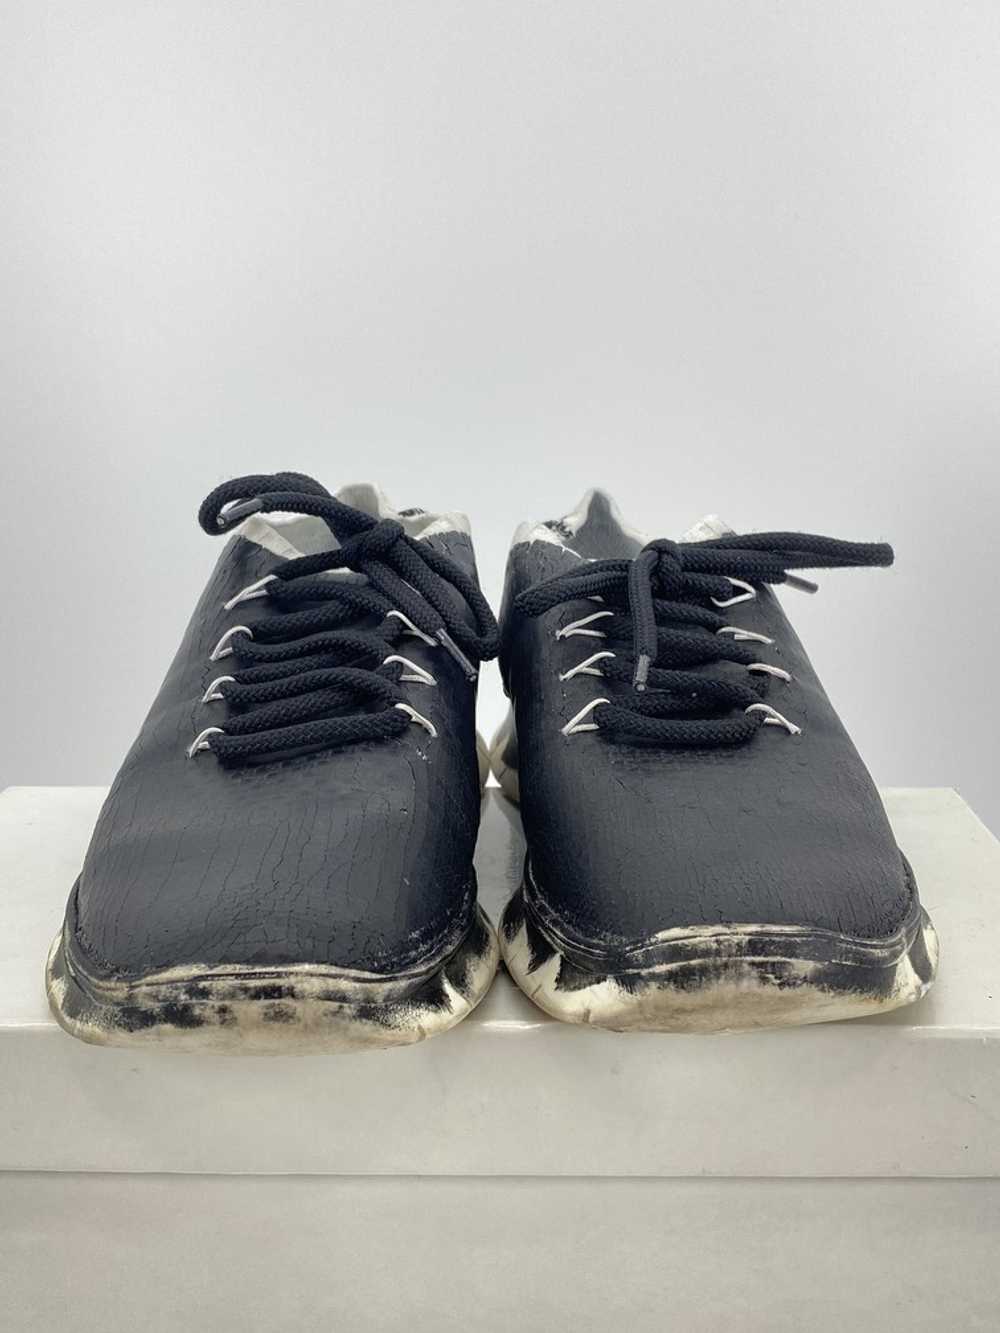 Maison Margiela Hand Painted Flyknit Runners - image 3